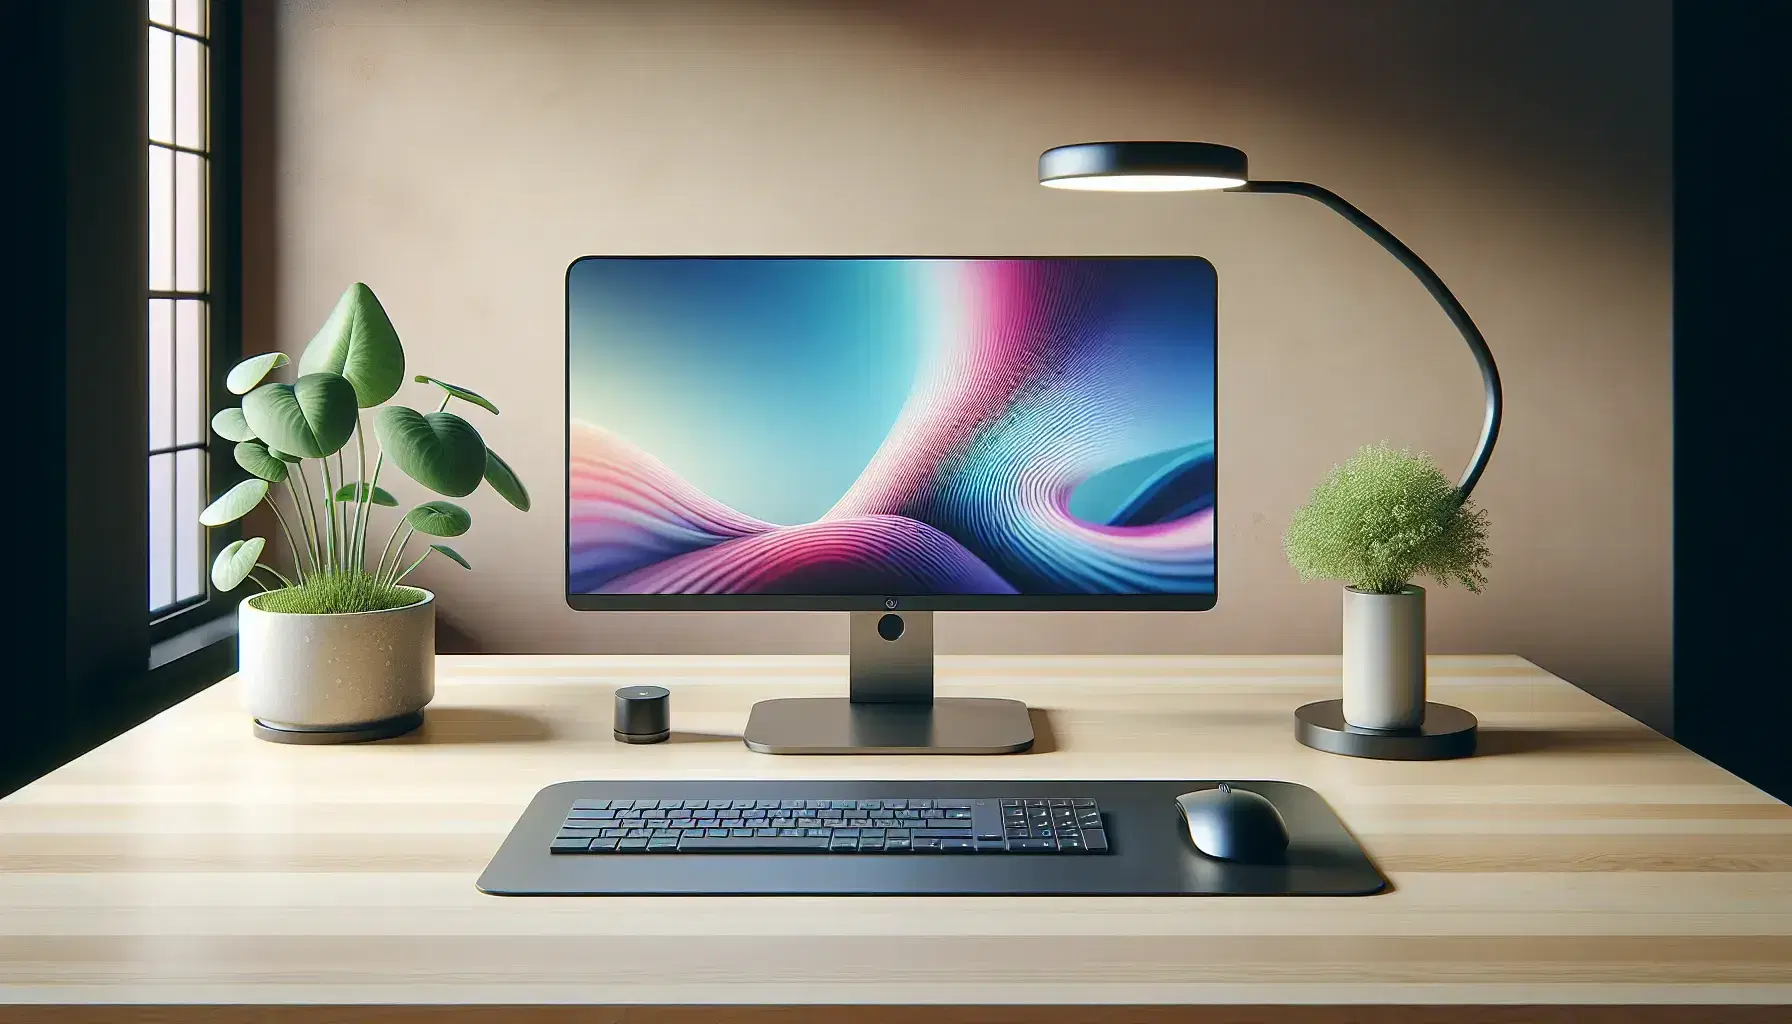 Modern computer station with high resolution monitor, wireless keyboard and mouse on a light wooden desk, designer lamp and green plant.